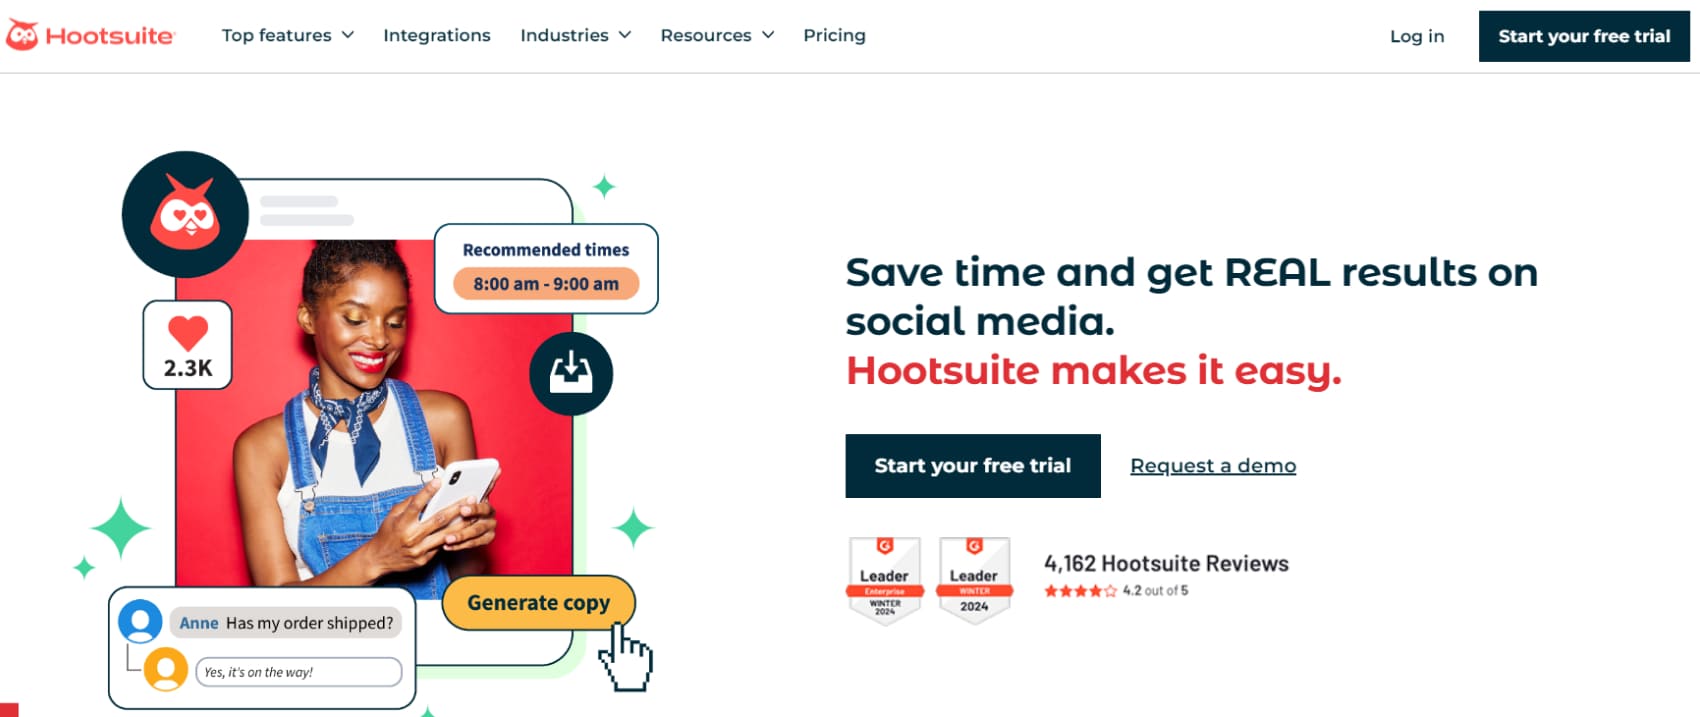 Hootsuite is one of the superior inbound marketing tools